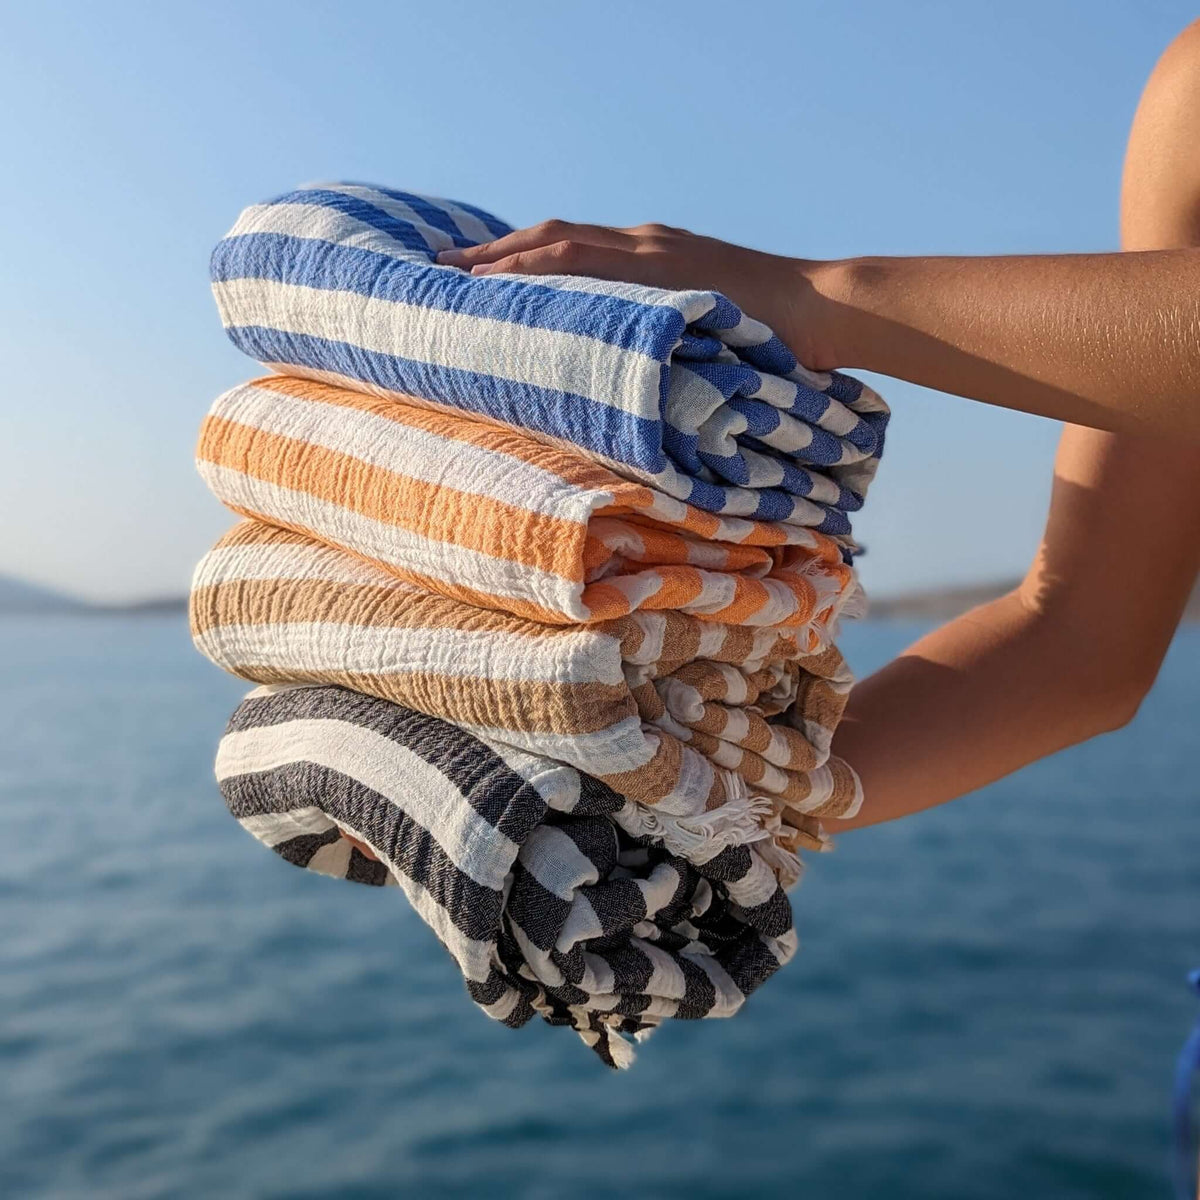 set of 4 muslin turkish beach towels blue orange brown black stripes on white on the boat with the sea on the background 